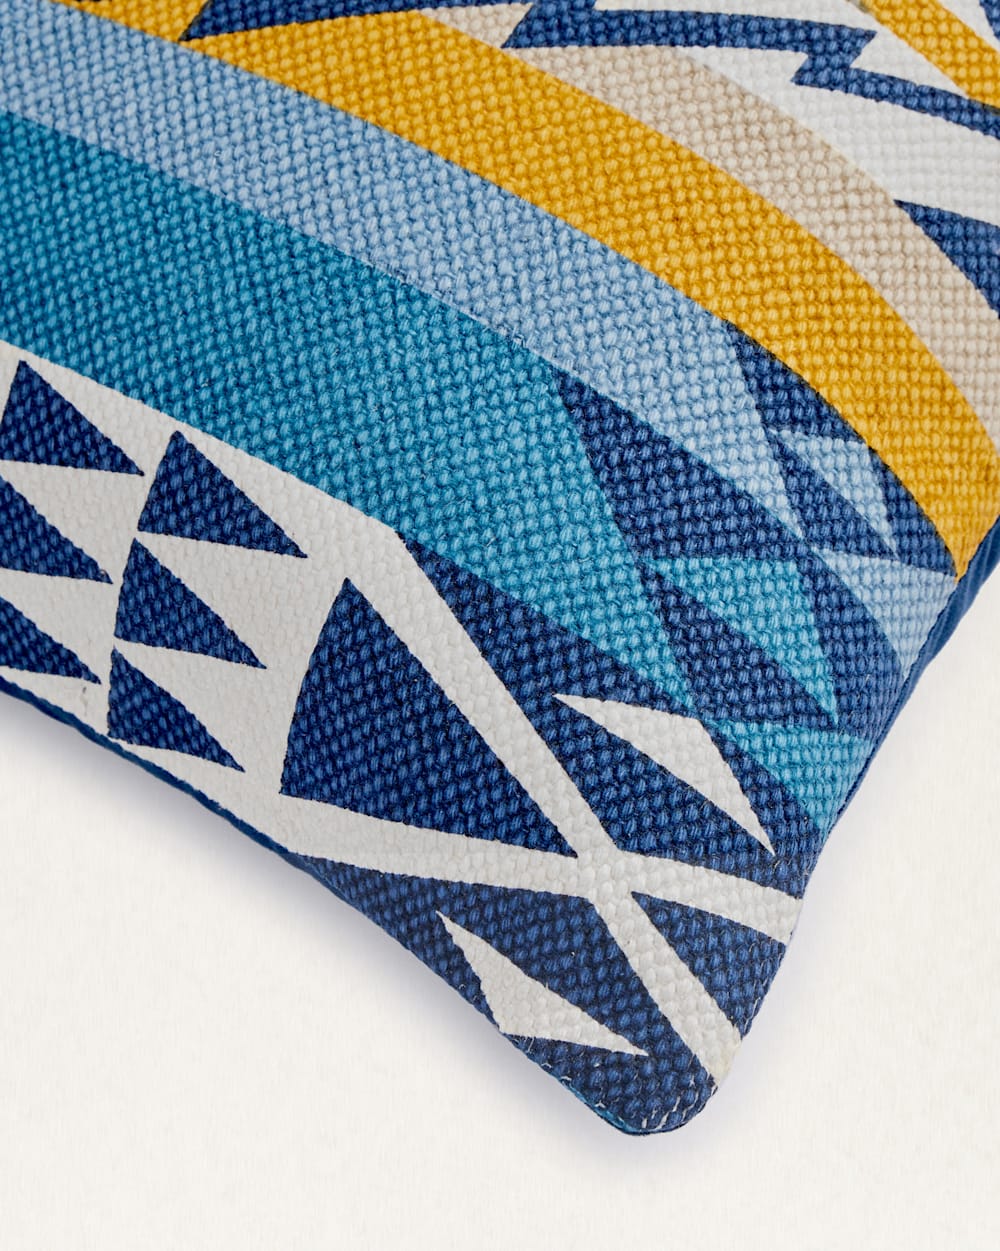 ALTERNATE VIEW OF TRAPPER PEAK PRINTED KILIM SQUARE PILLOW IN BLUE/GOLD image number 2